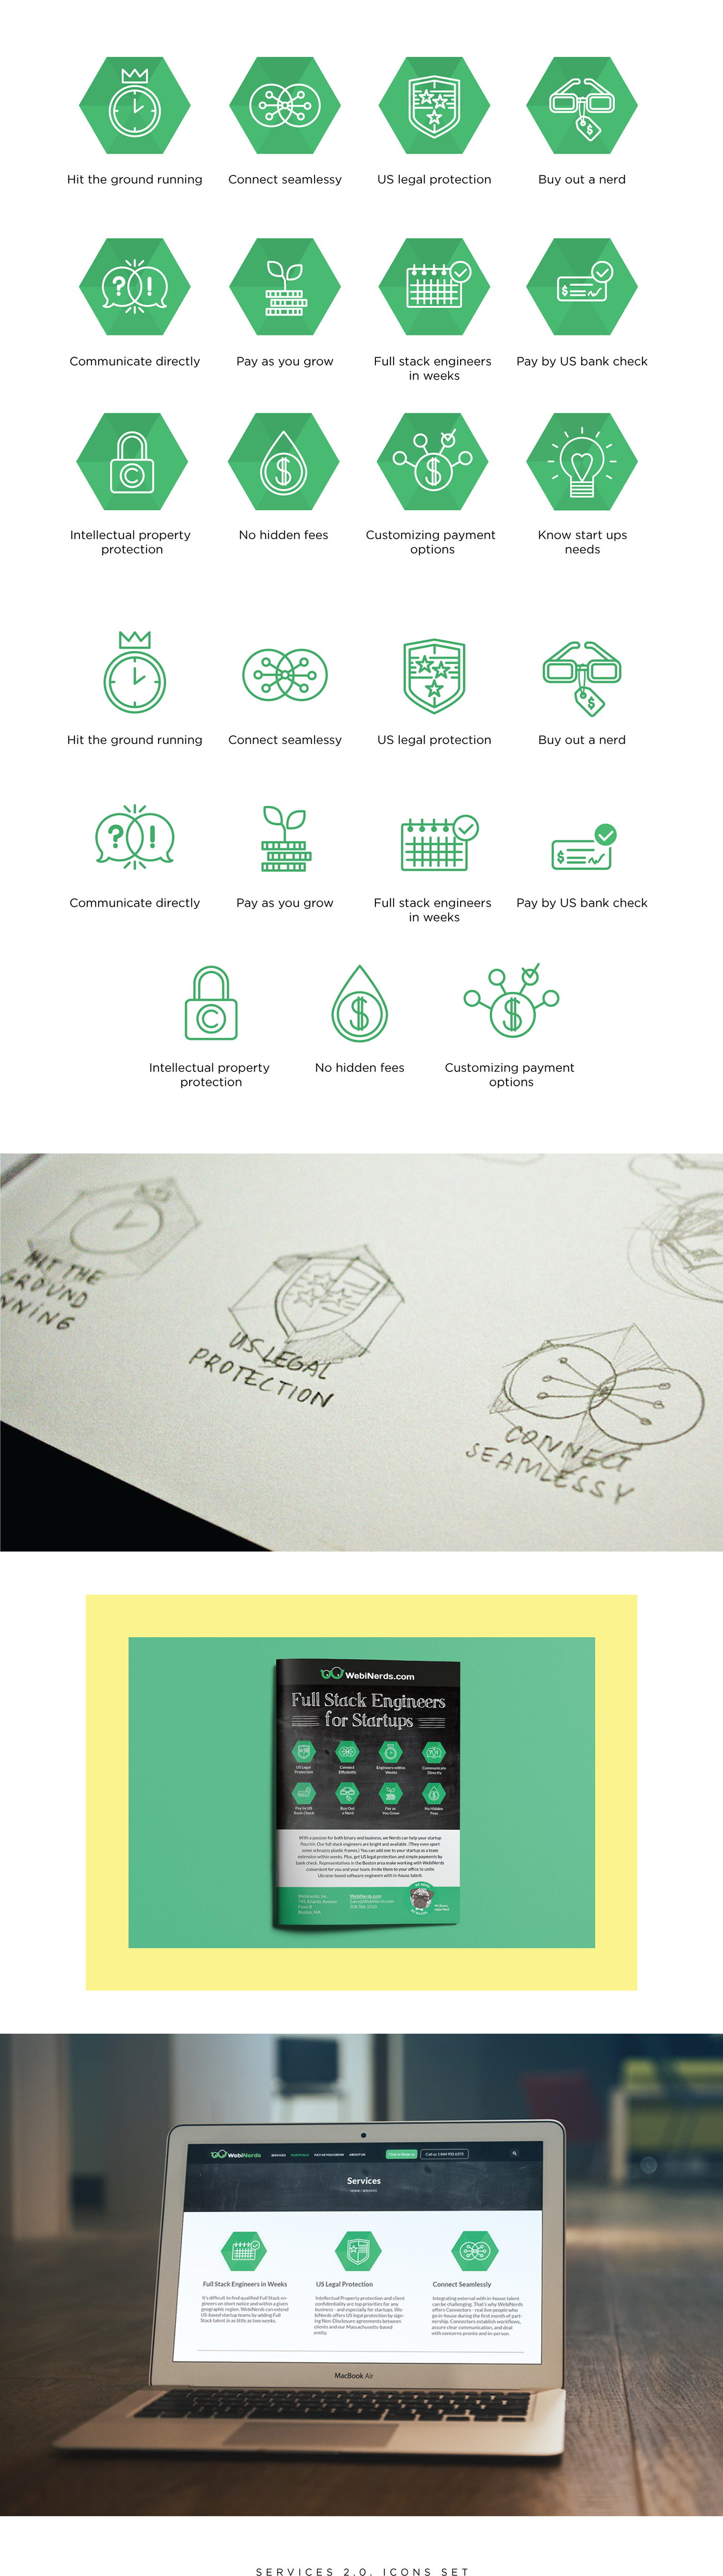 icons vector icons uiux graphic design  Outline Icons vector graphics